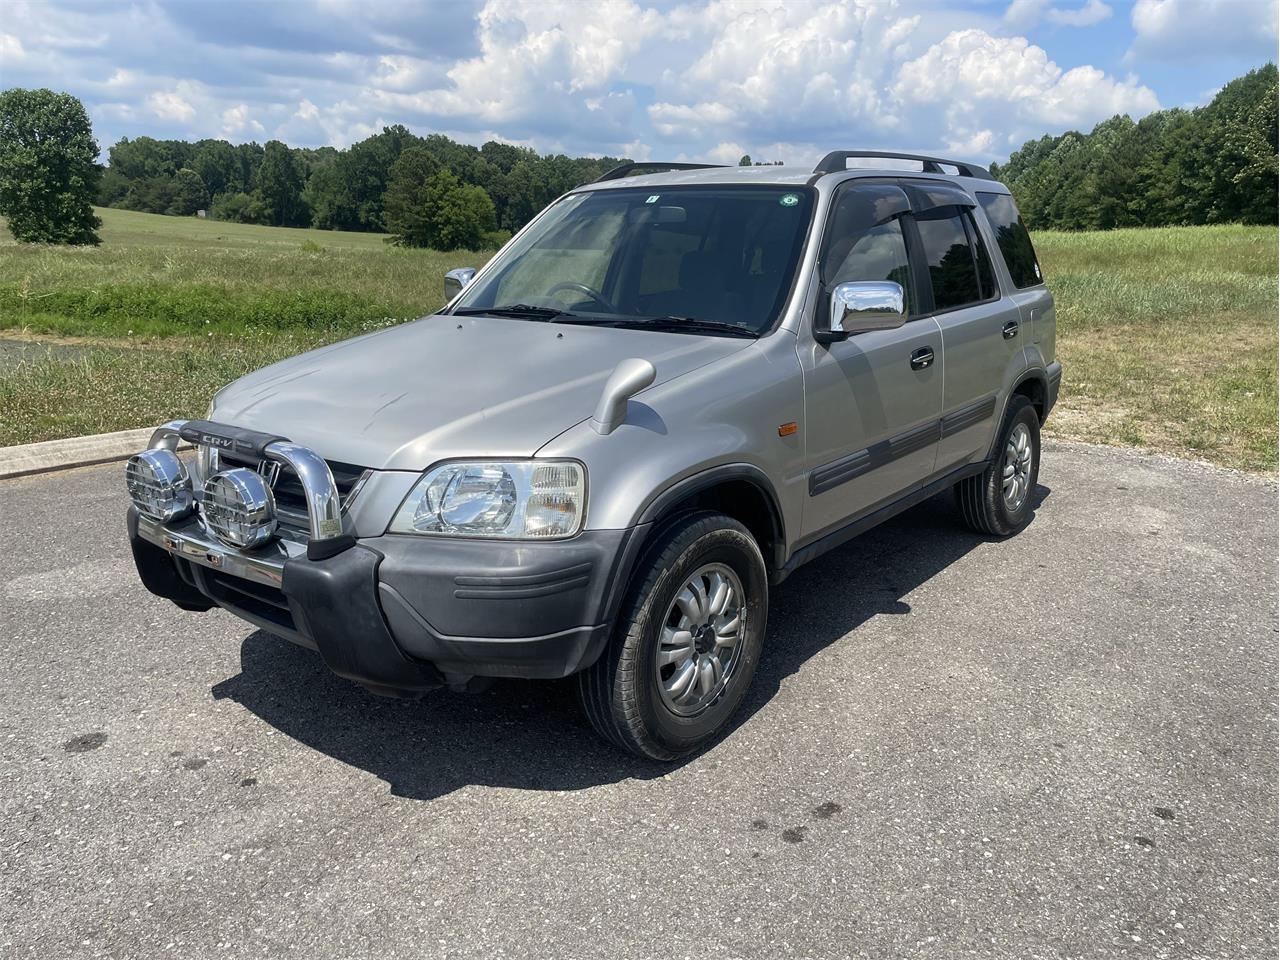 for sale 1996 honda crv in cleveland, tennessee for sale in cleveland, tn